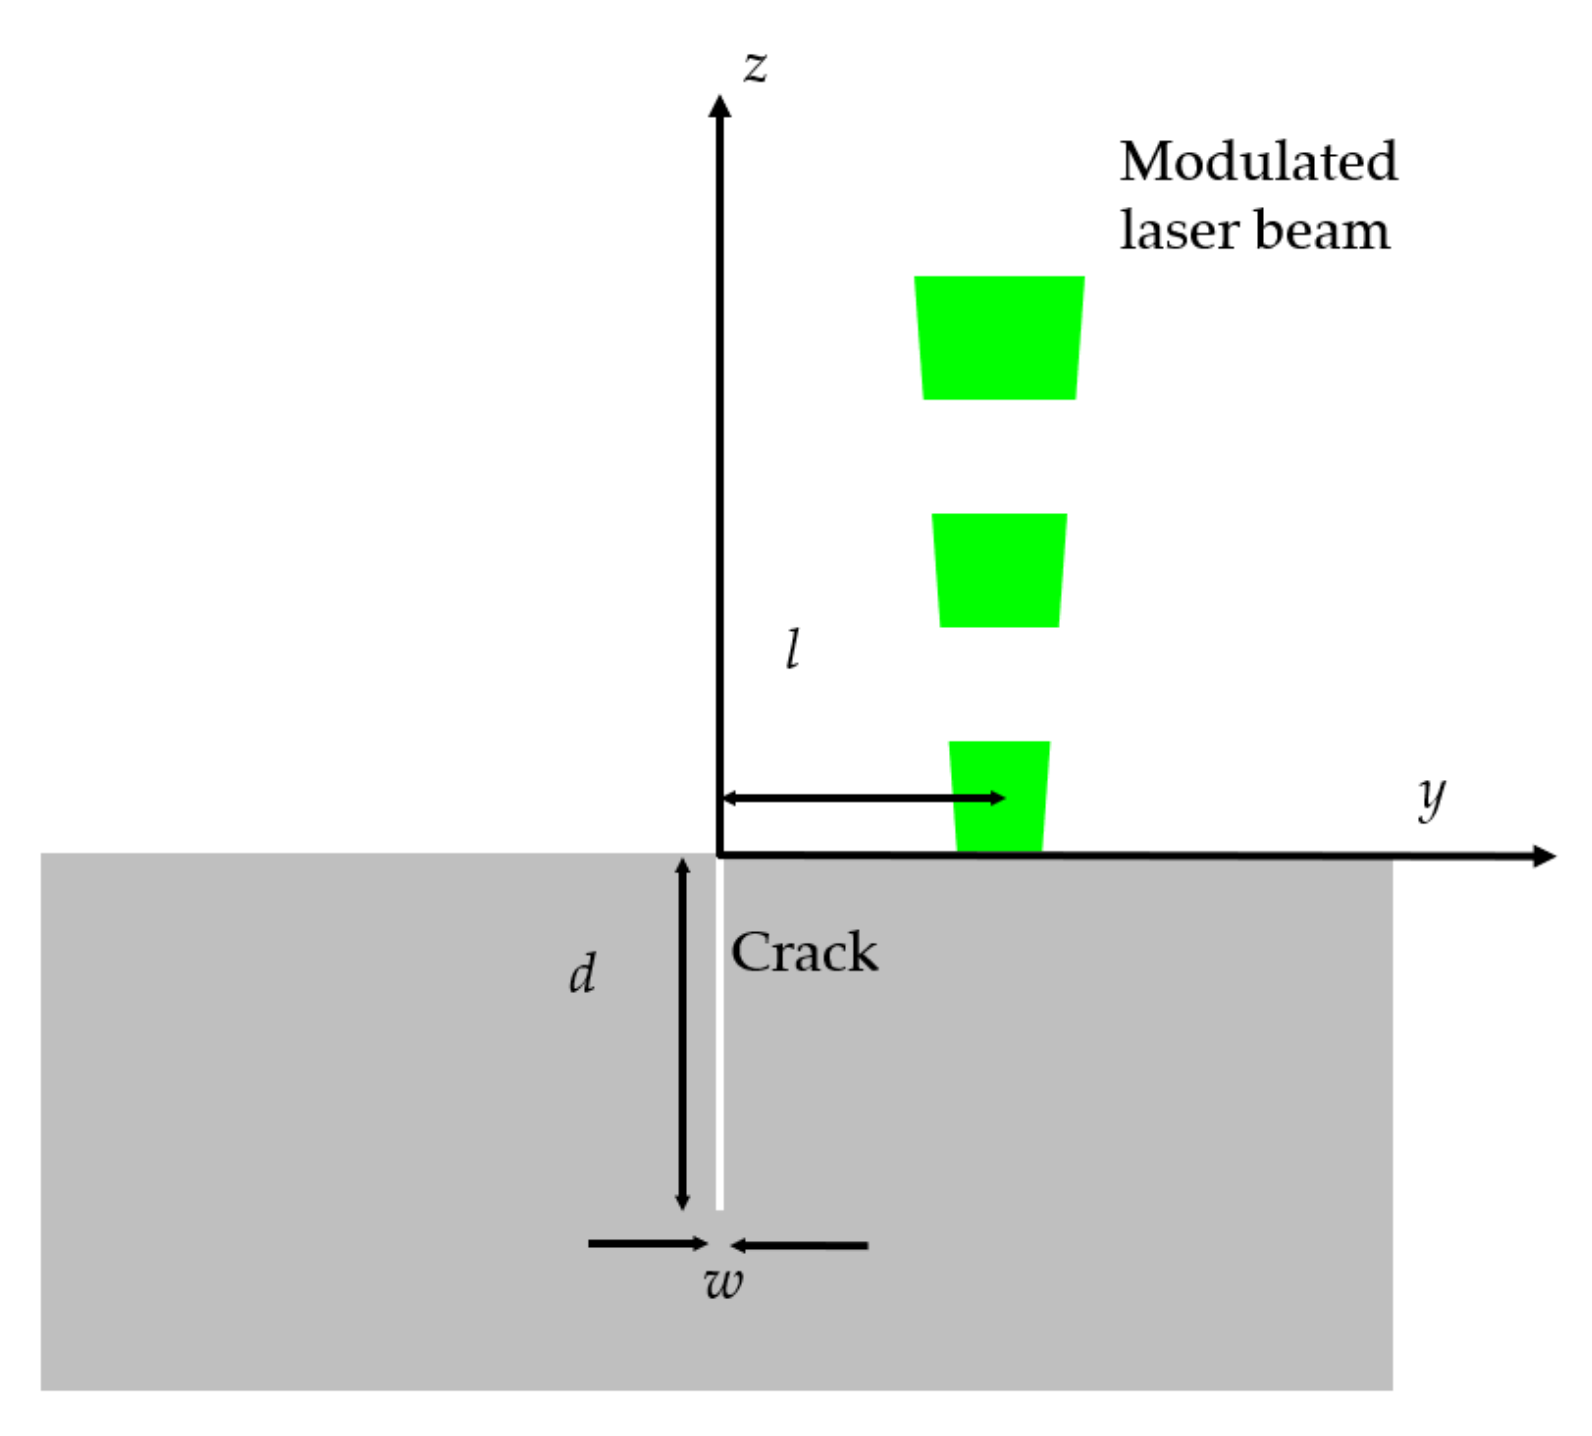 Overall morphology of cracked graphite block